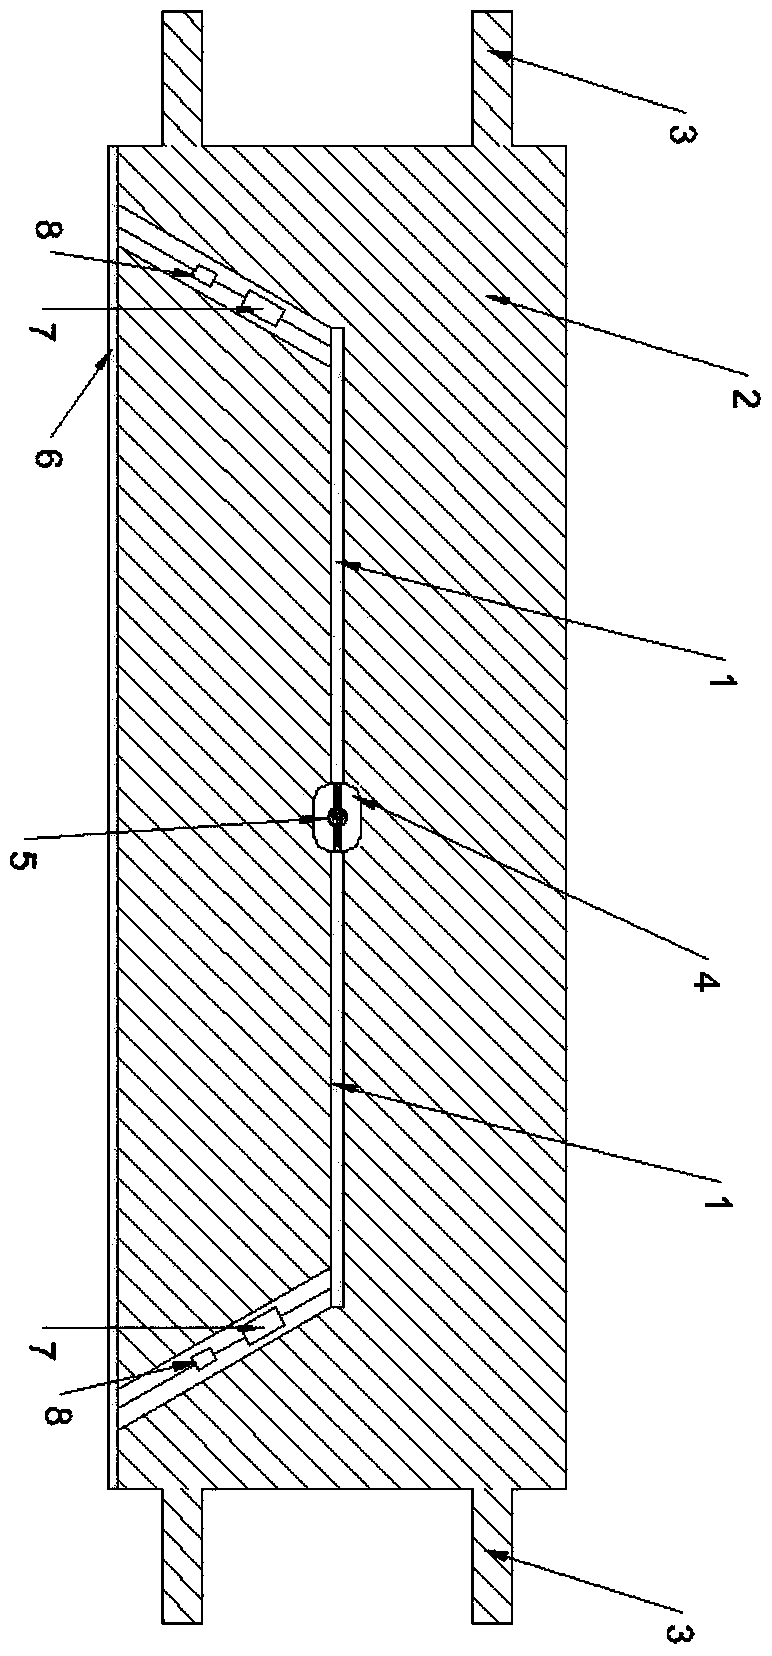 A Bow-shaped Directional Antenna for Borehole Radar